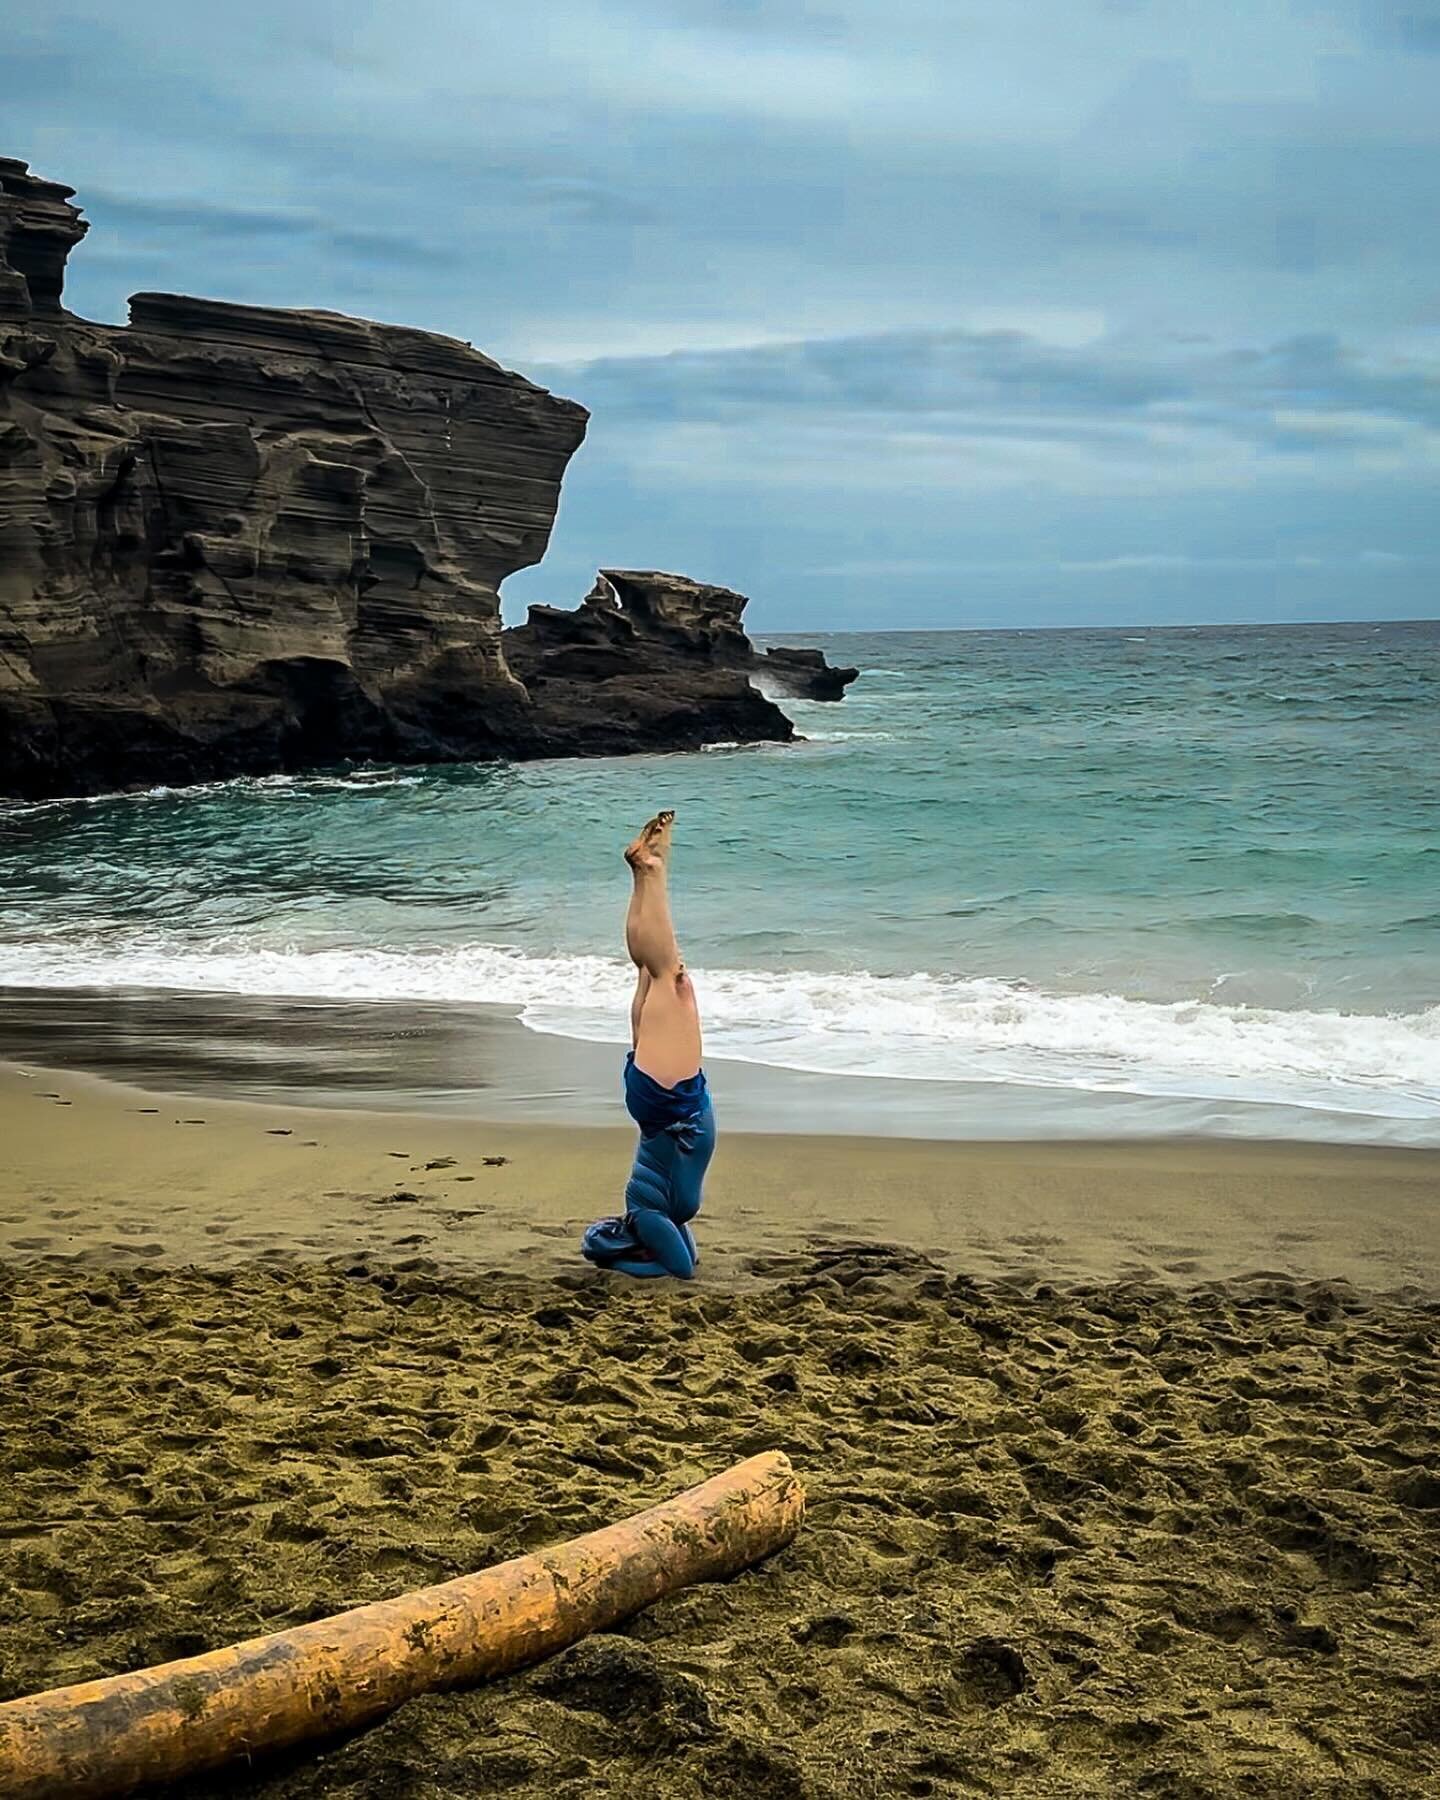 Papakōlea Beach, 1 out of 4 green sand beaches in the world. What an incredible beach and energy it has! 

Green Sand Beach is the unique combination of olivine-rich lava deposits and other sand components.

#headstand #headstandpractice #headstandpo